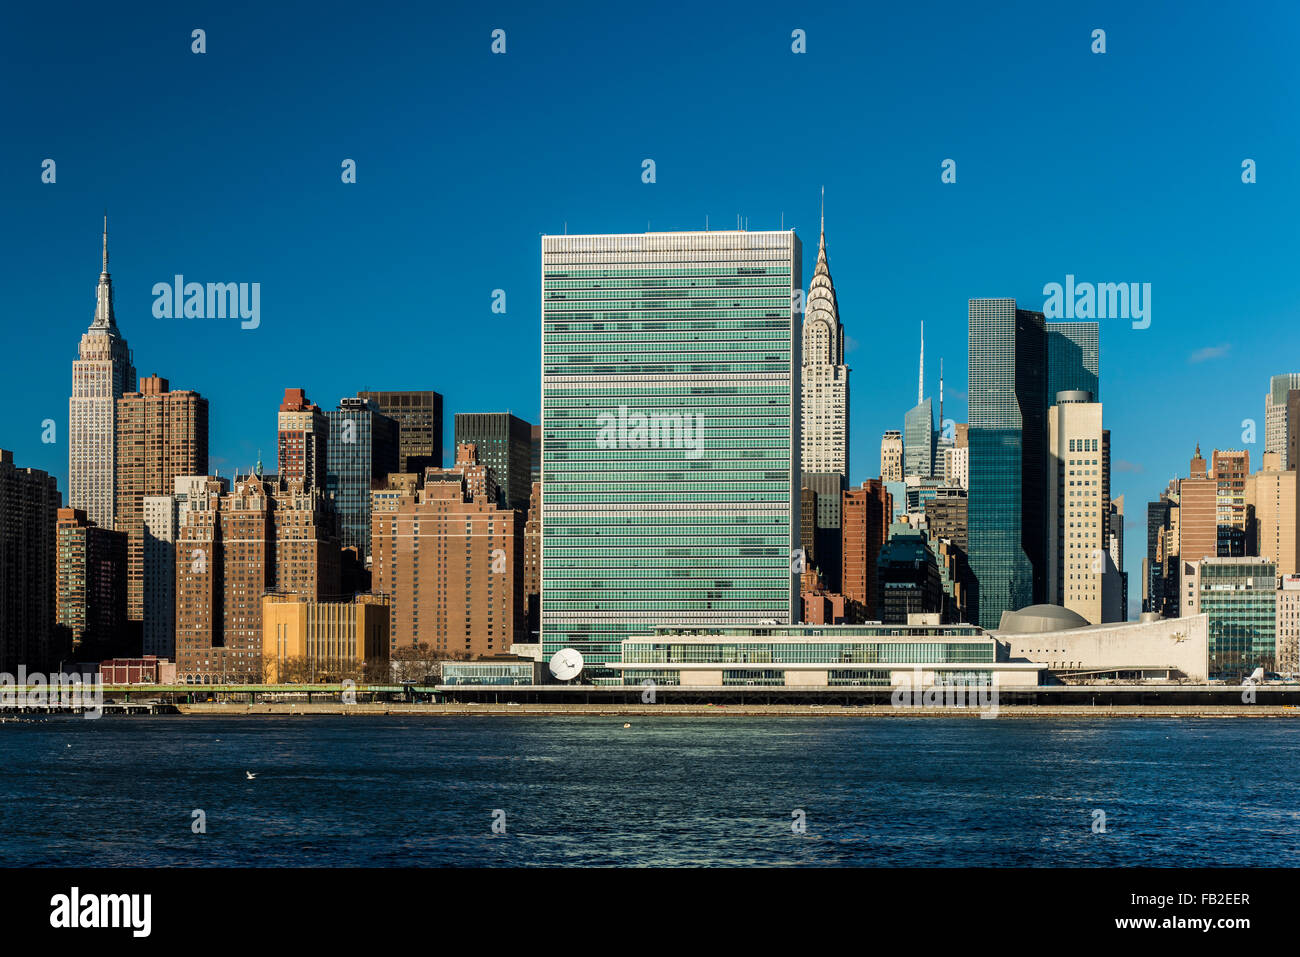 Manhattan skyline with the Headquarters of the United Nations, Empire State Building and Chrysler Building, New York, USA Stock Photo